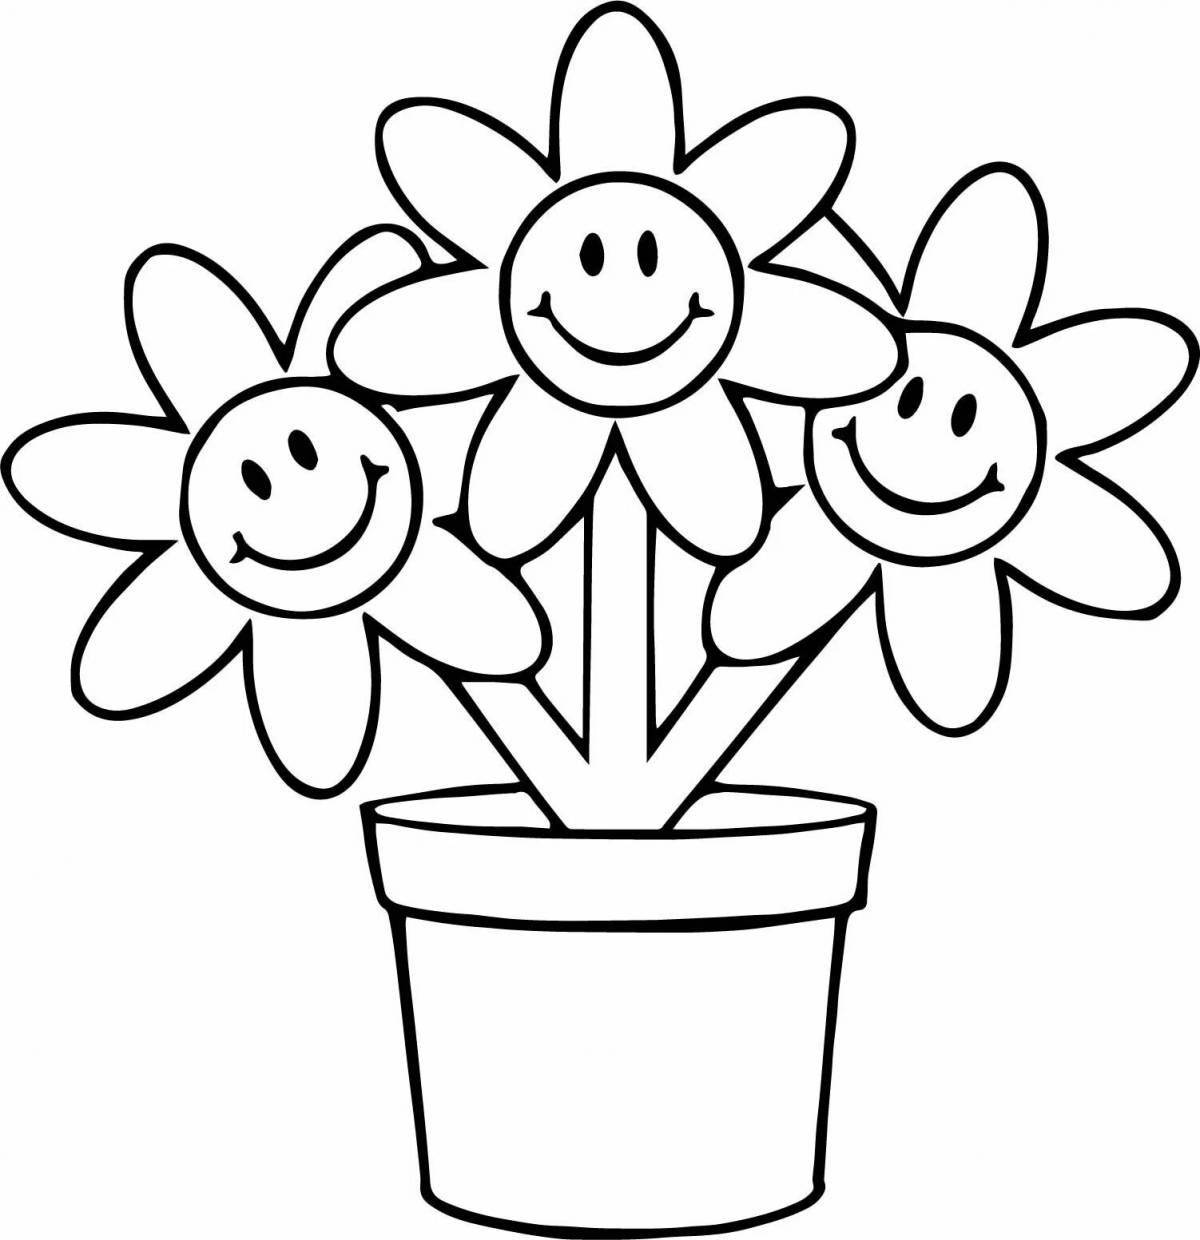 Grand coloring page flower picture